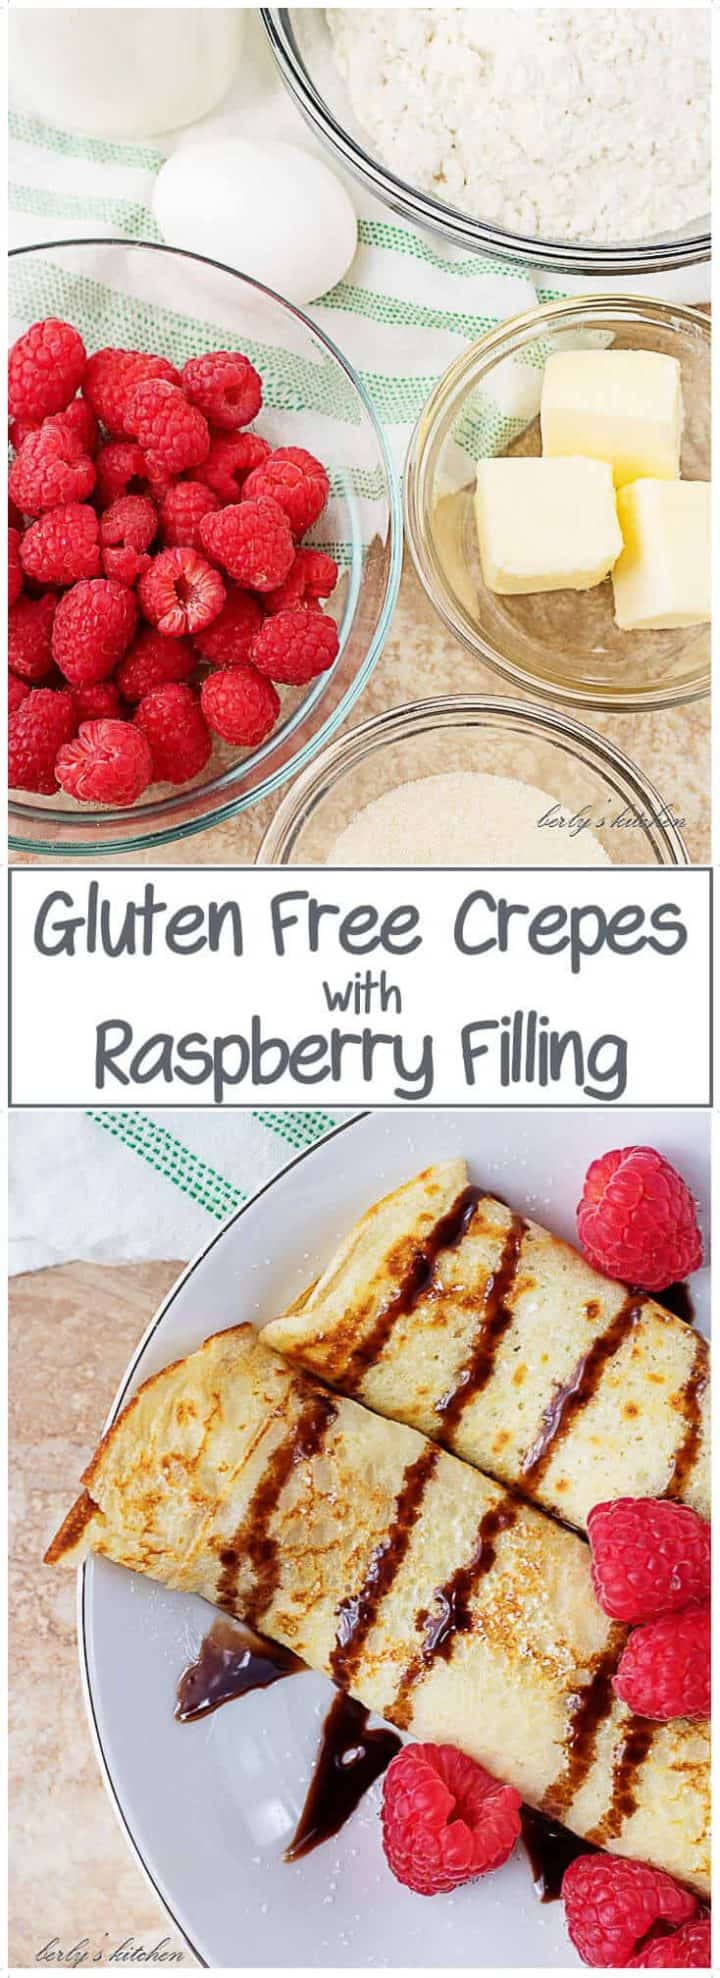 Two photos, one of the ingredients like raspberries and butter, the other picture of the finished crepes on a white plate.